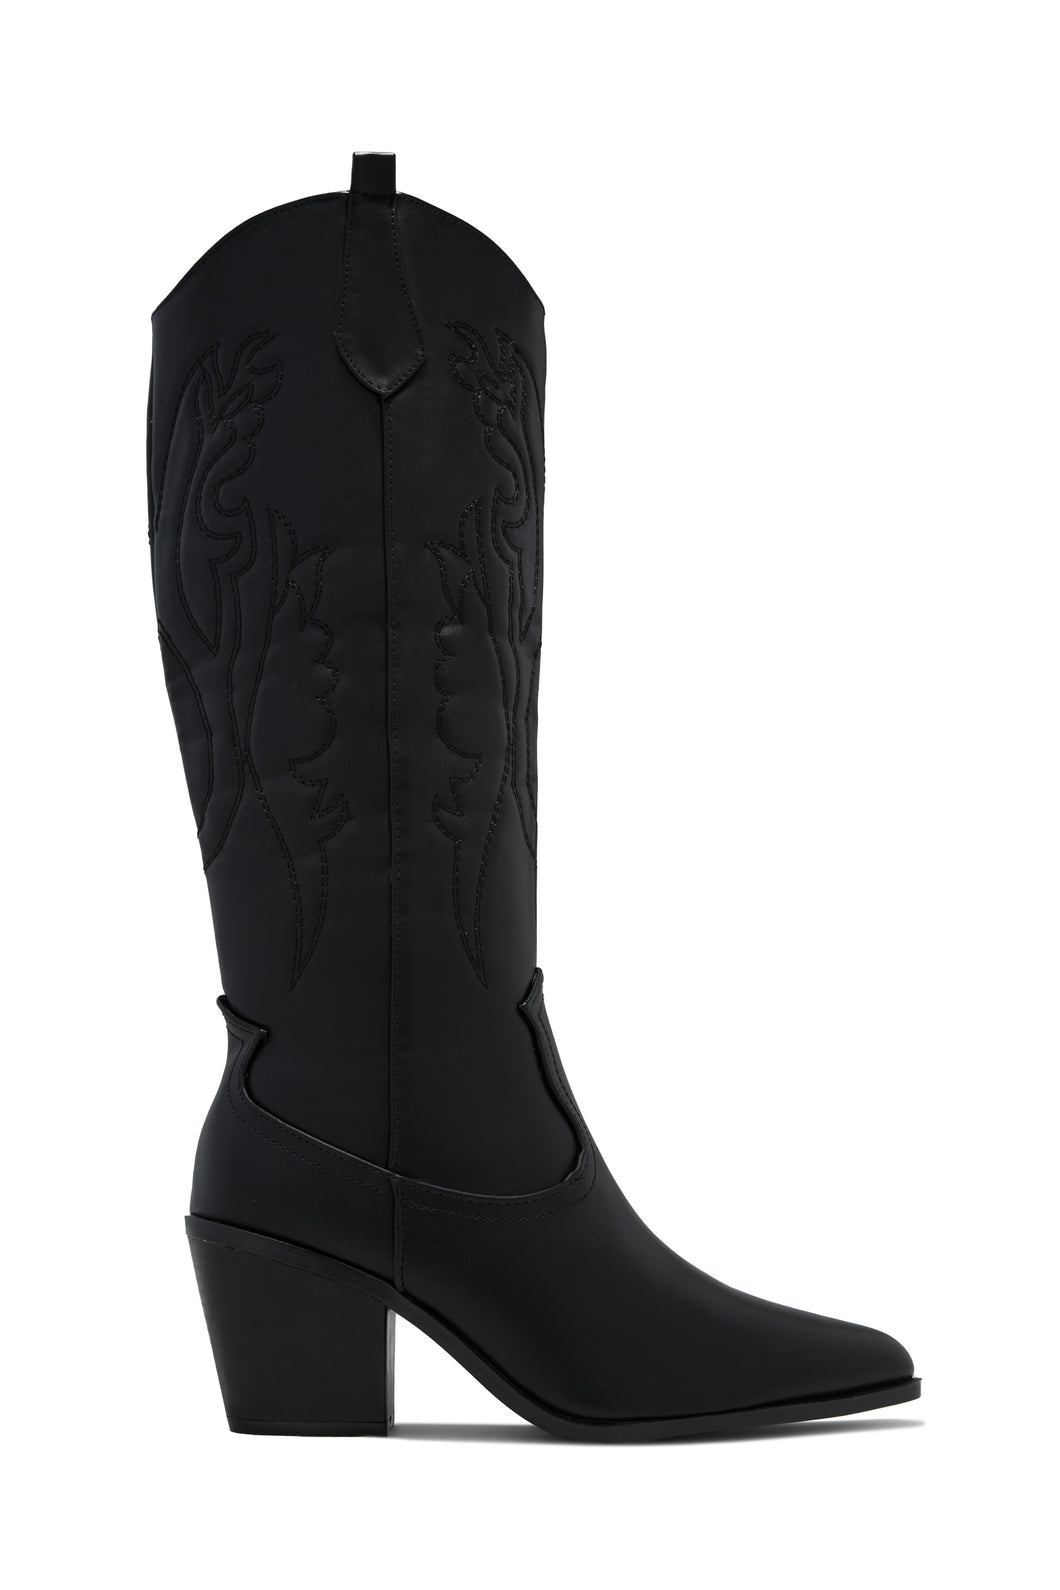 Miller Cowgirl Boots - Black